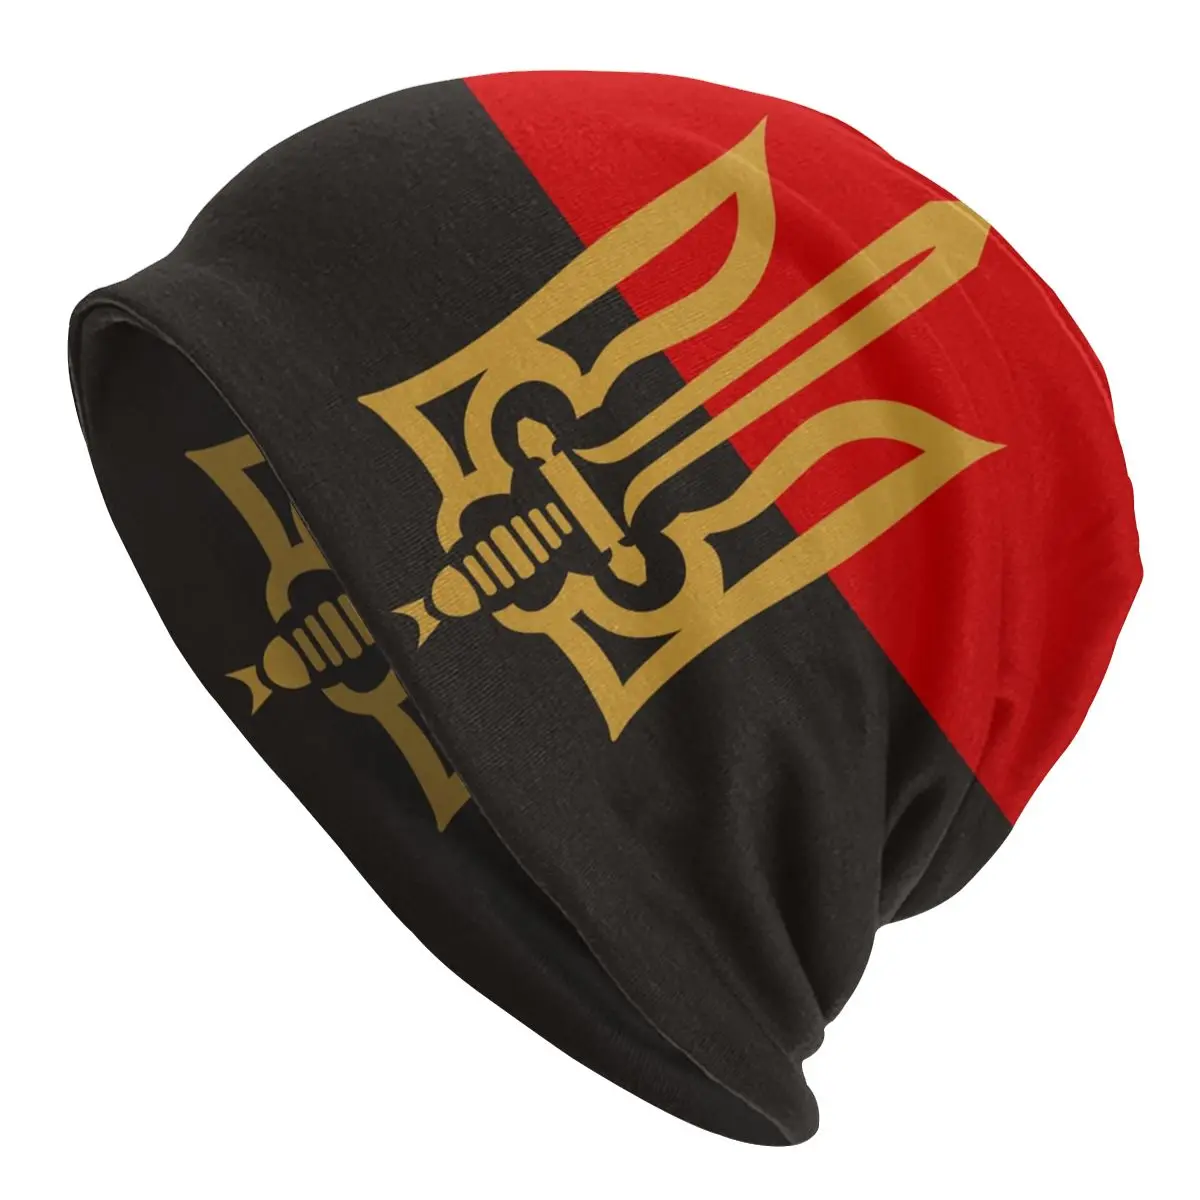 

Stylized Tryzub And Red Black Bonnet Femme Knitted Hat For Women Men Autumn Winter Warm Coat Of Arms Ukraine Flag Beanies Caps